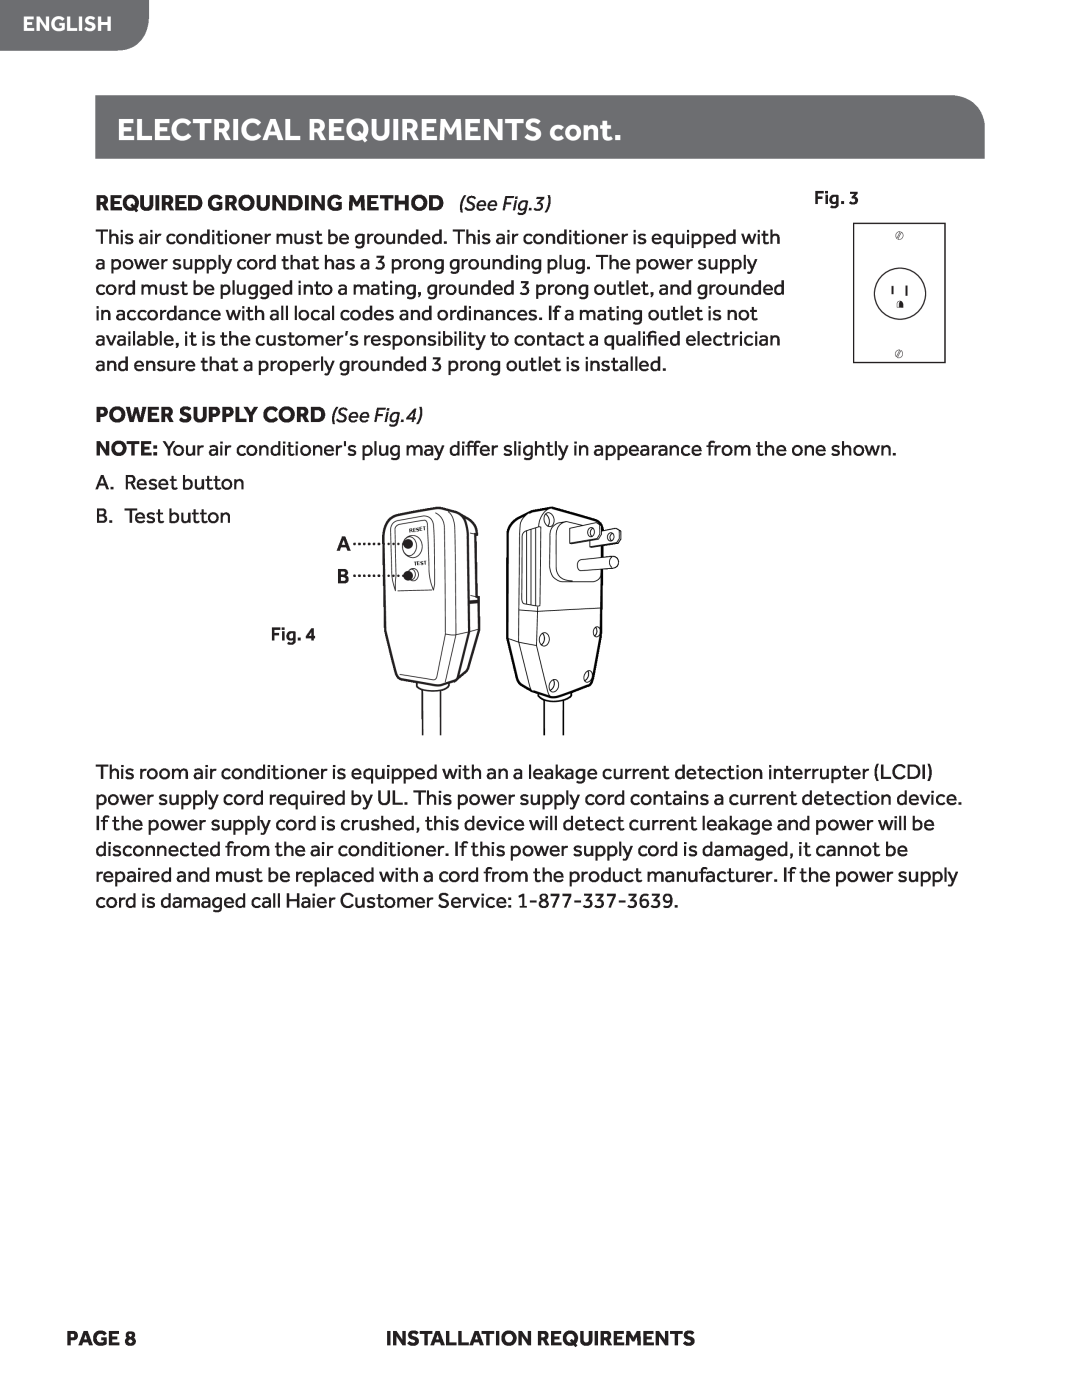 Haier HWF05XCL manual ELECTRICAL REQUIREMENTS cont, REQUIRED GROUNDING METHOD See, POWER SUPPLY CORD See, English, Page 